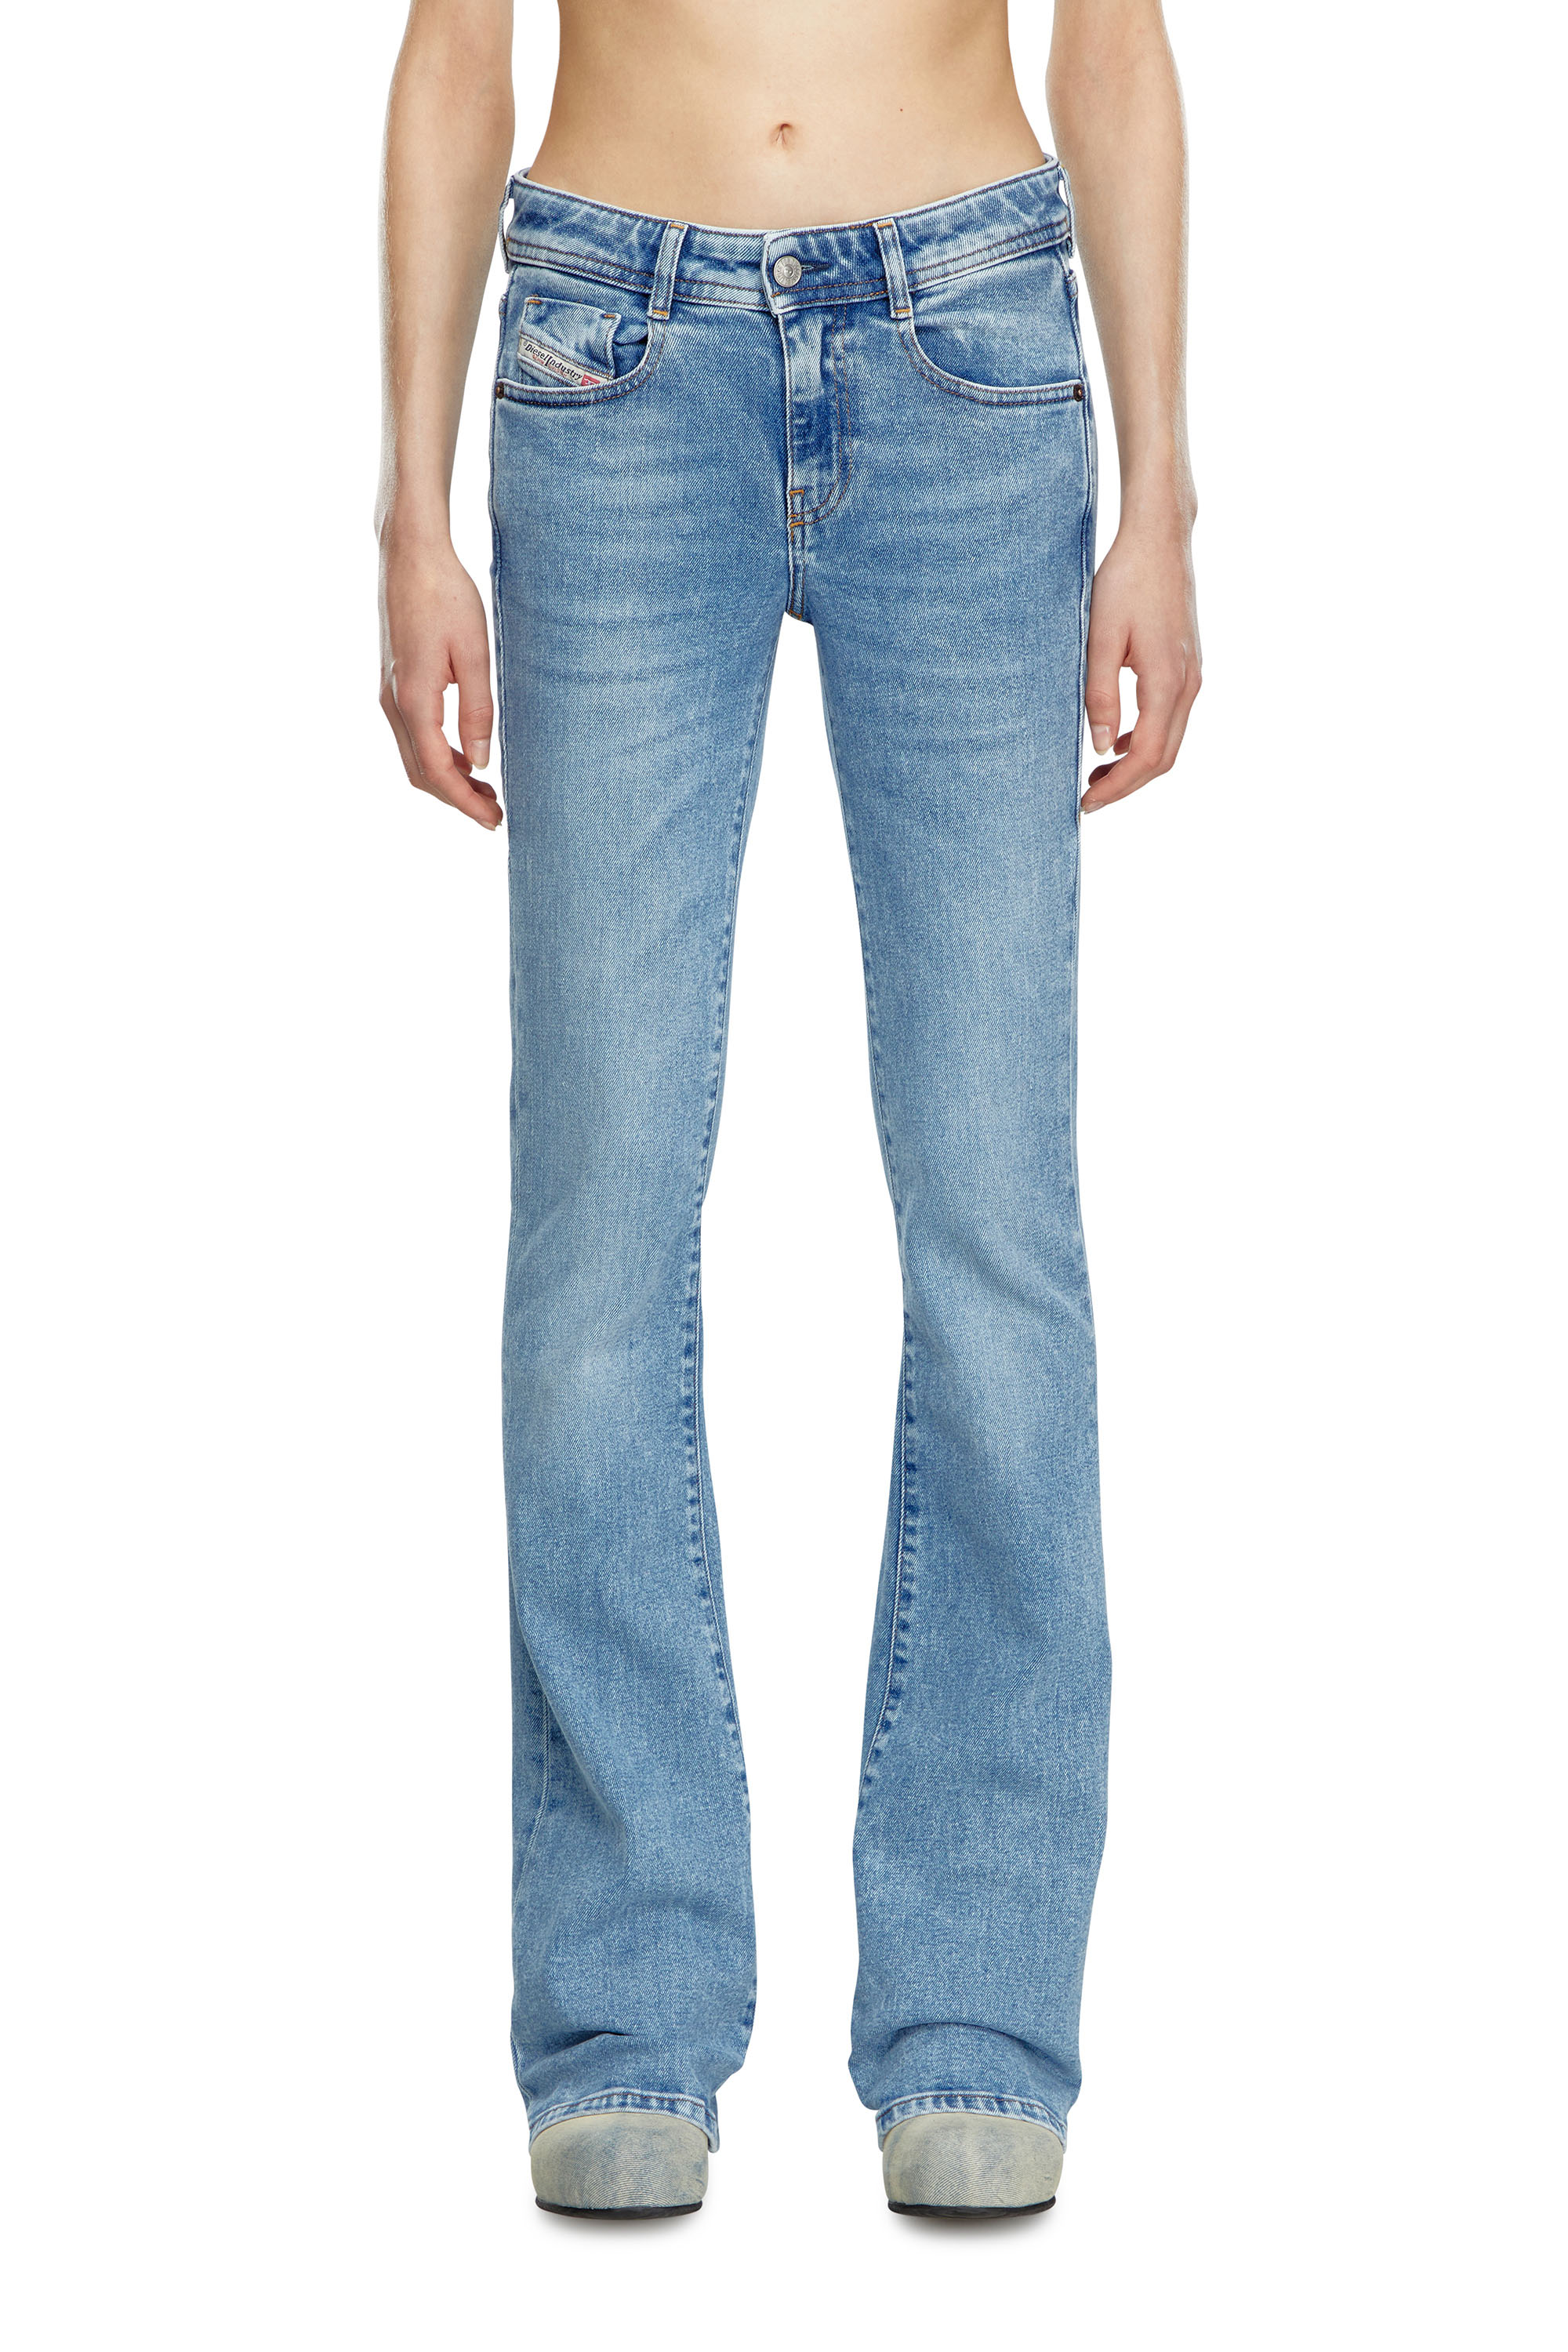 Bootcut and Flare Jeans 1969 D-Ebbey 9B92L, Light Blue - Jeans